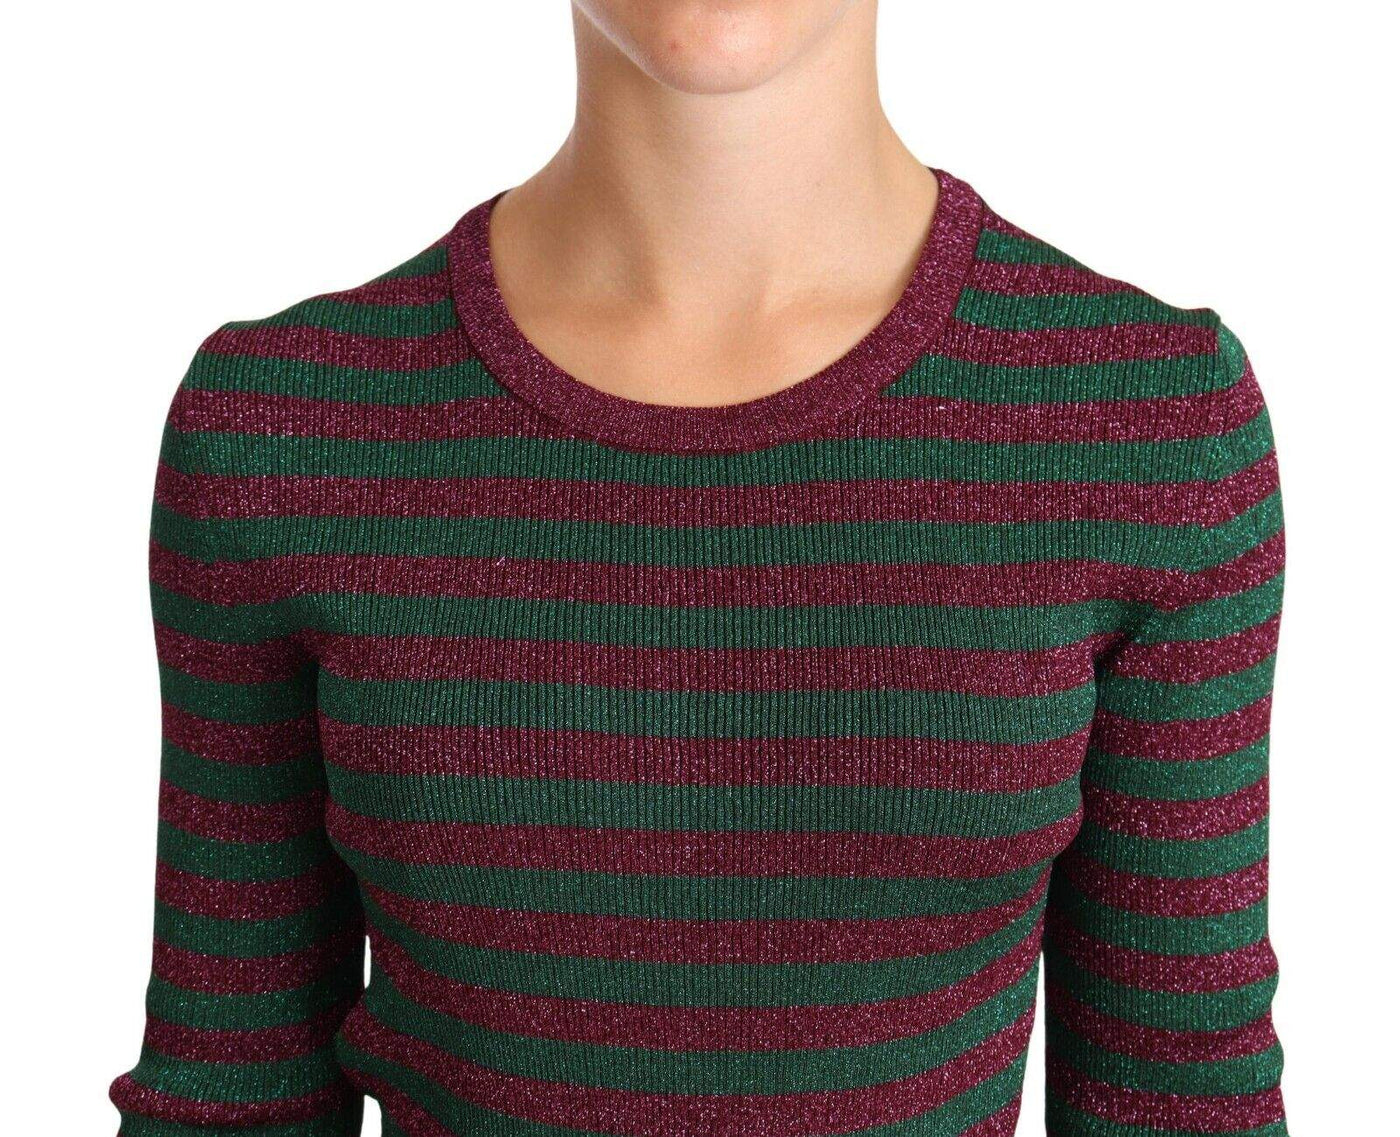 Dolce & Gabbana Multicolor Striped Crew Neck Pullover Sweater Dolce & Gabbana, feed-1, IT40|S, IT42|M, Multicolor, Sweaters - Women - Clothing at SEYMAYKA